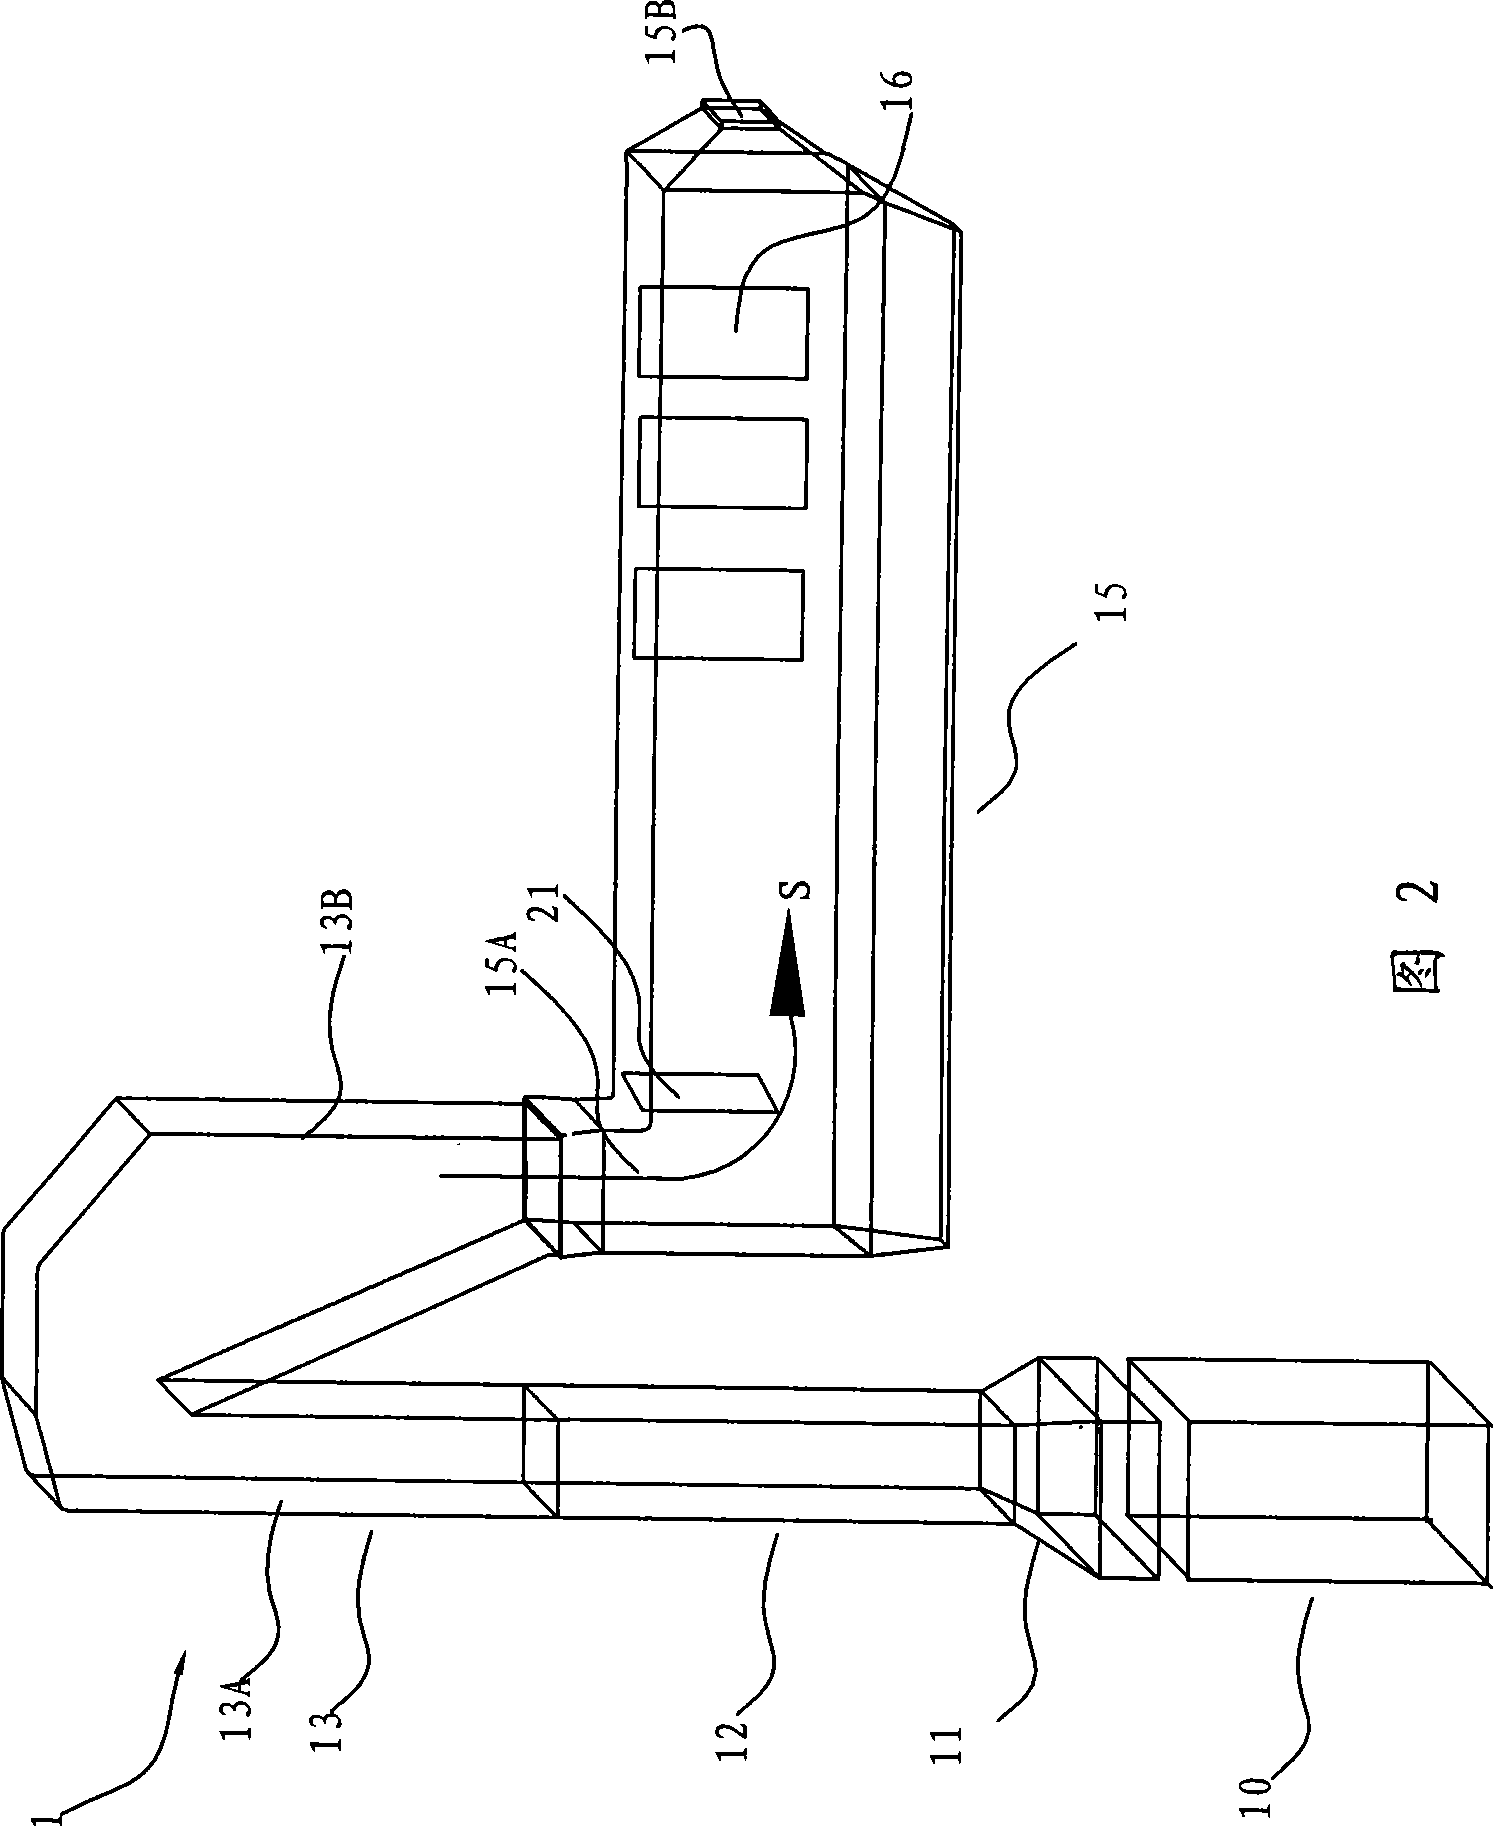 Exhaust-heating boiler and furnace body thereof